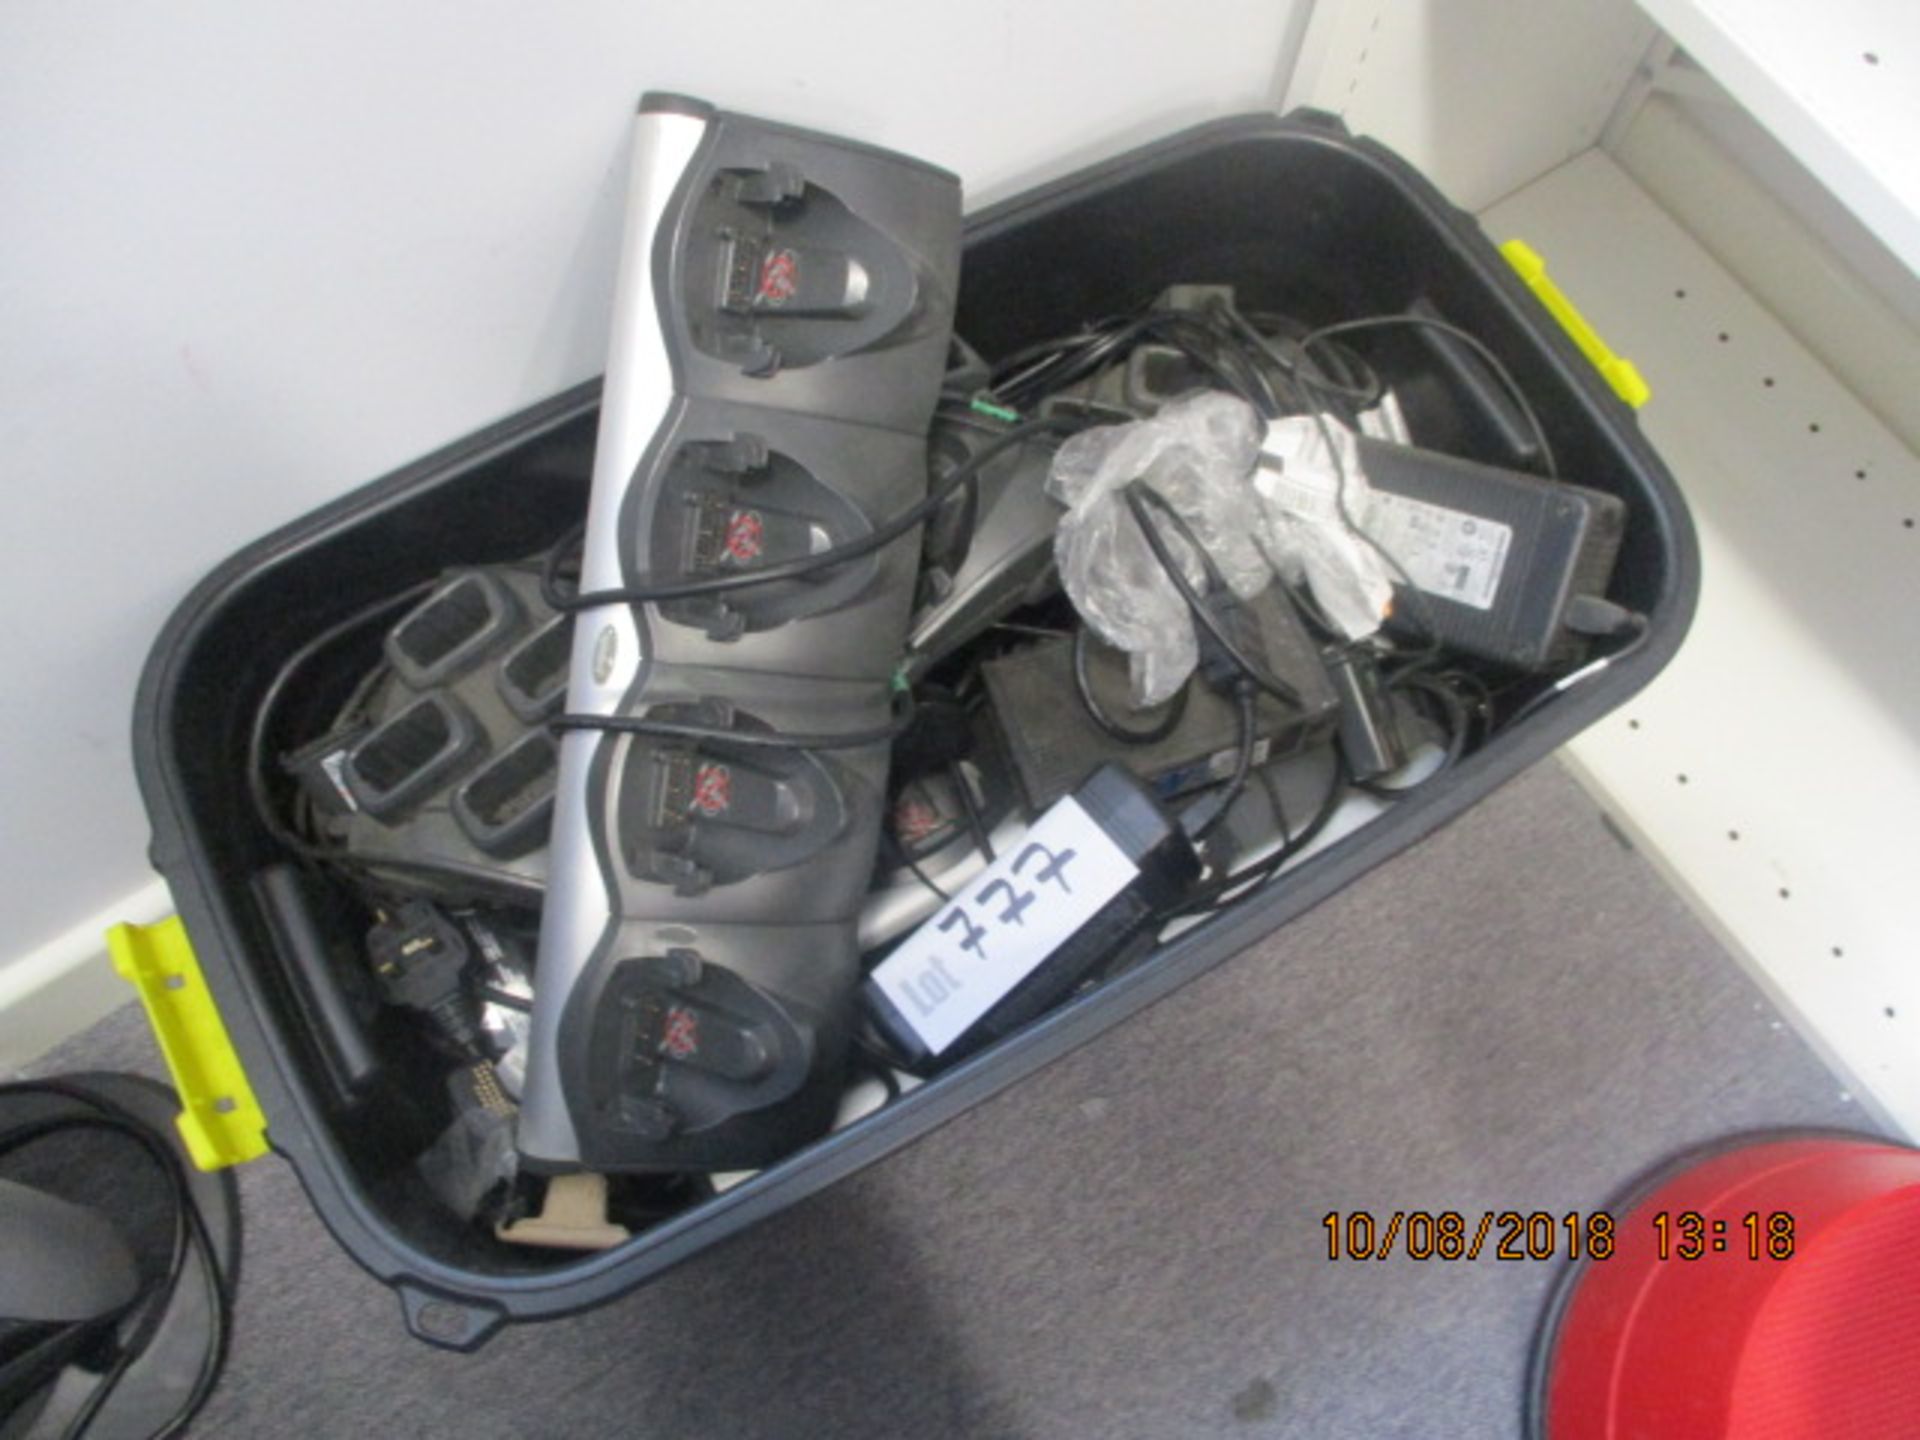 Assorted Scanner Docking Stations, as set out in b